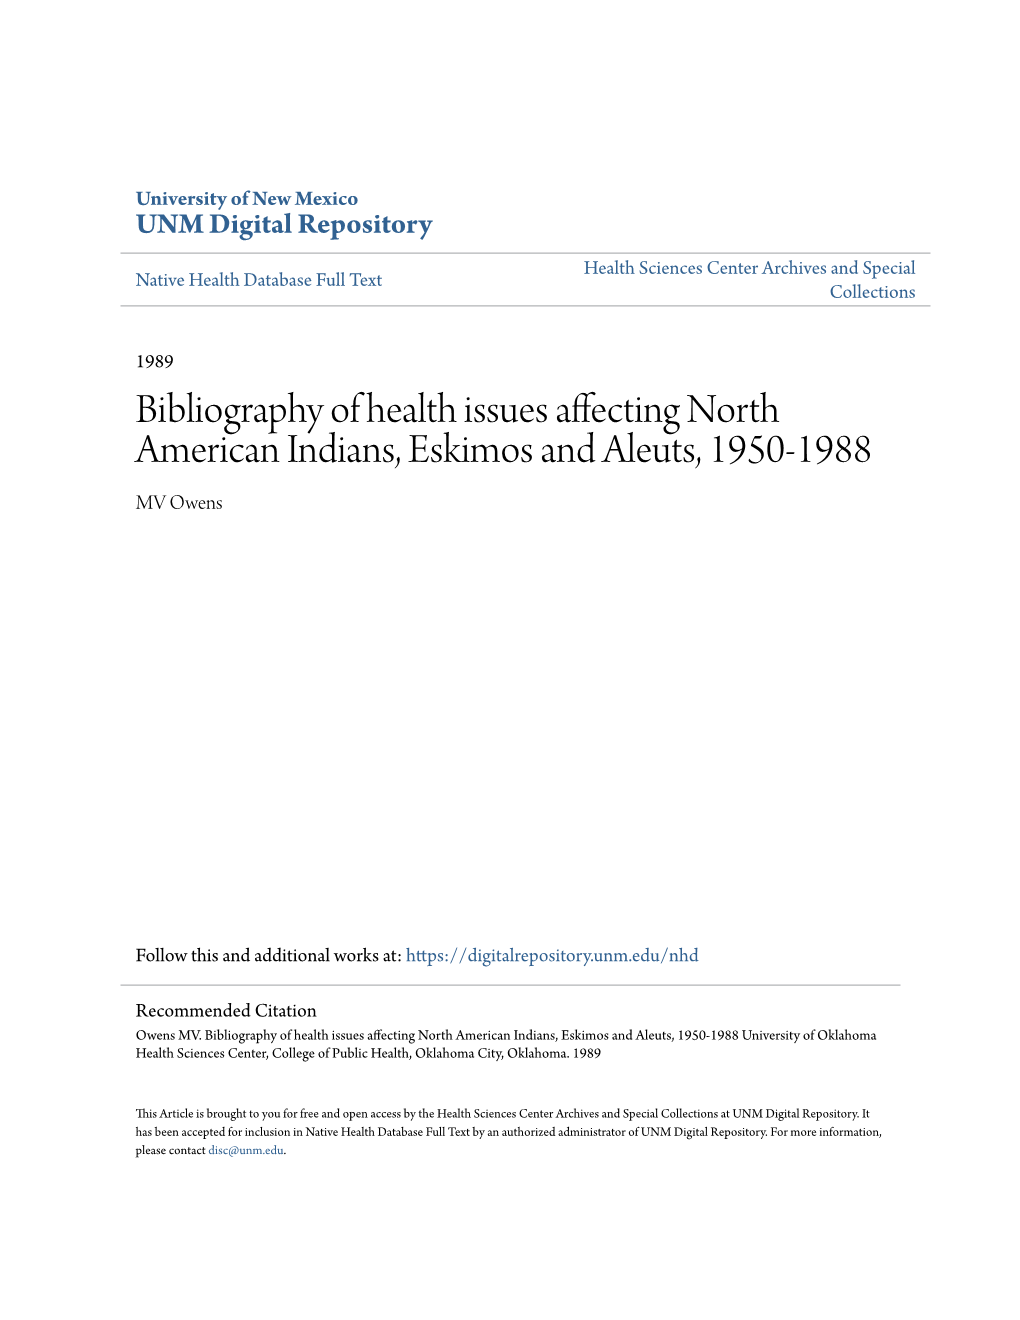 Bibliography of Health Issues Affecting North American Indians, Eskimos and Aleuts, 1950-1988 MV Owens